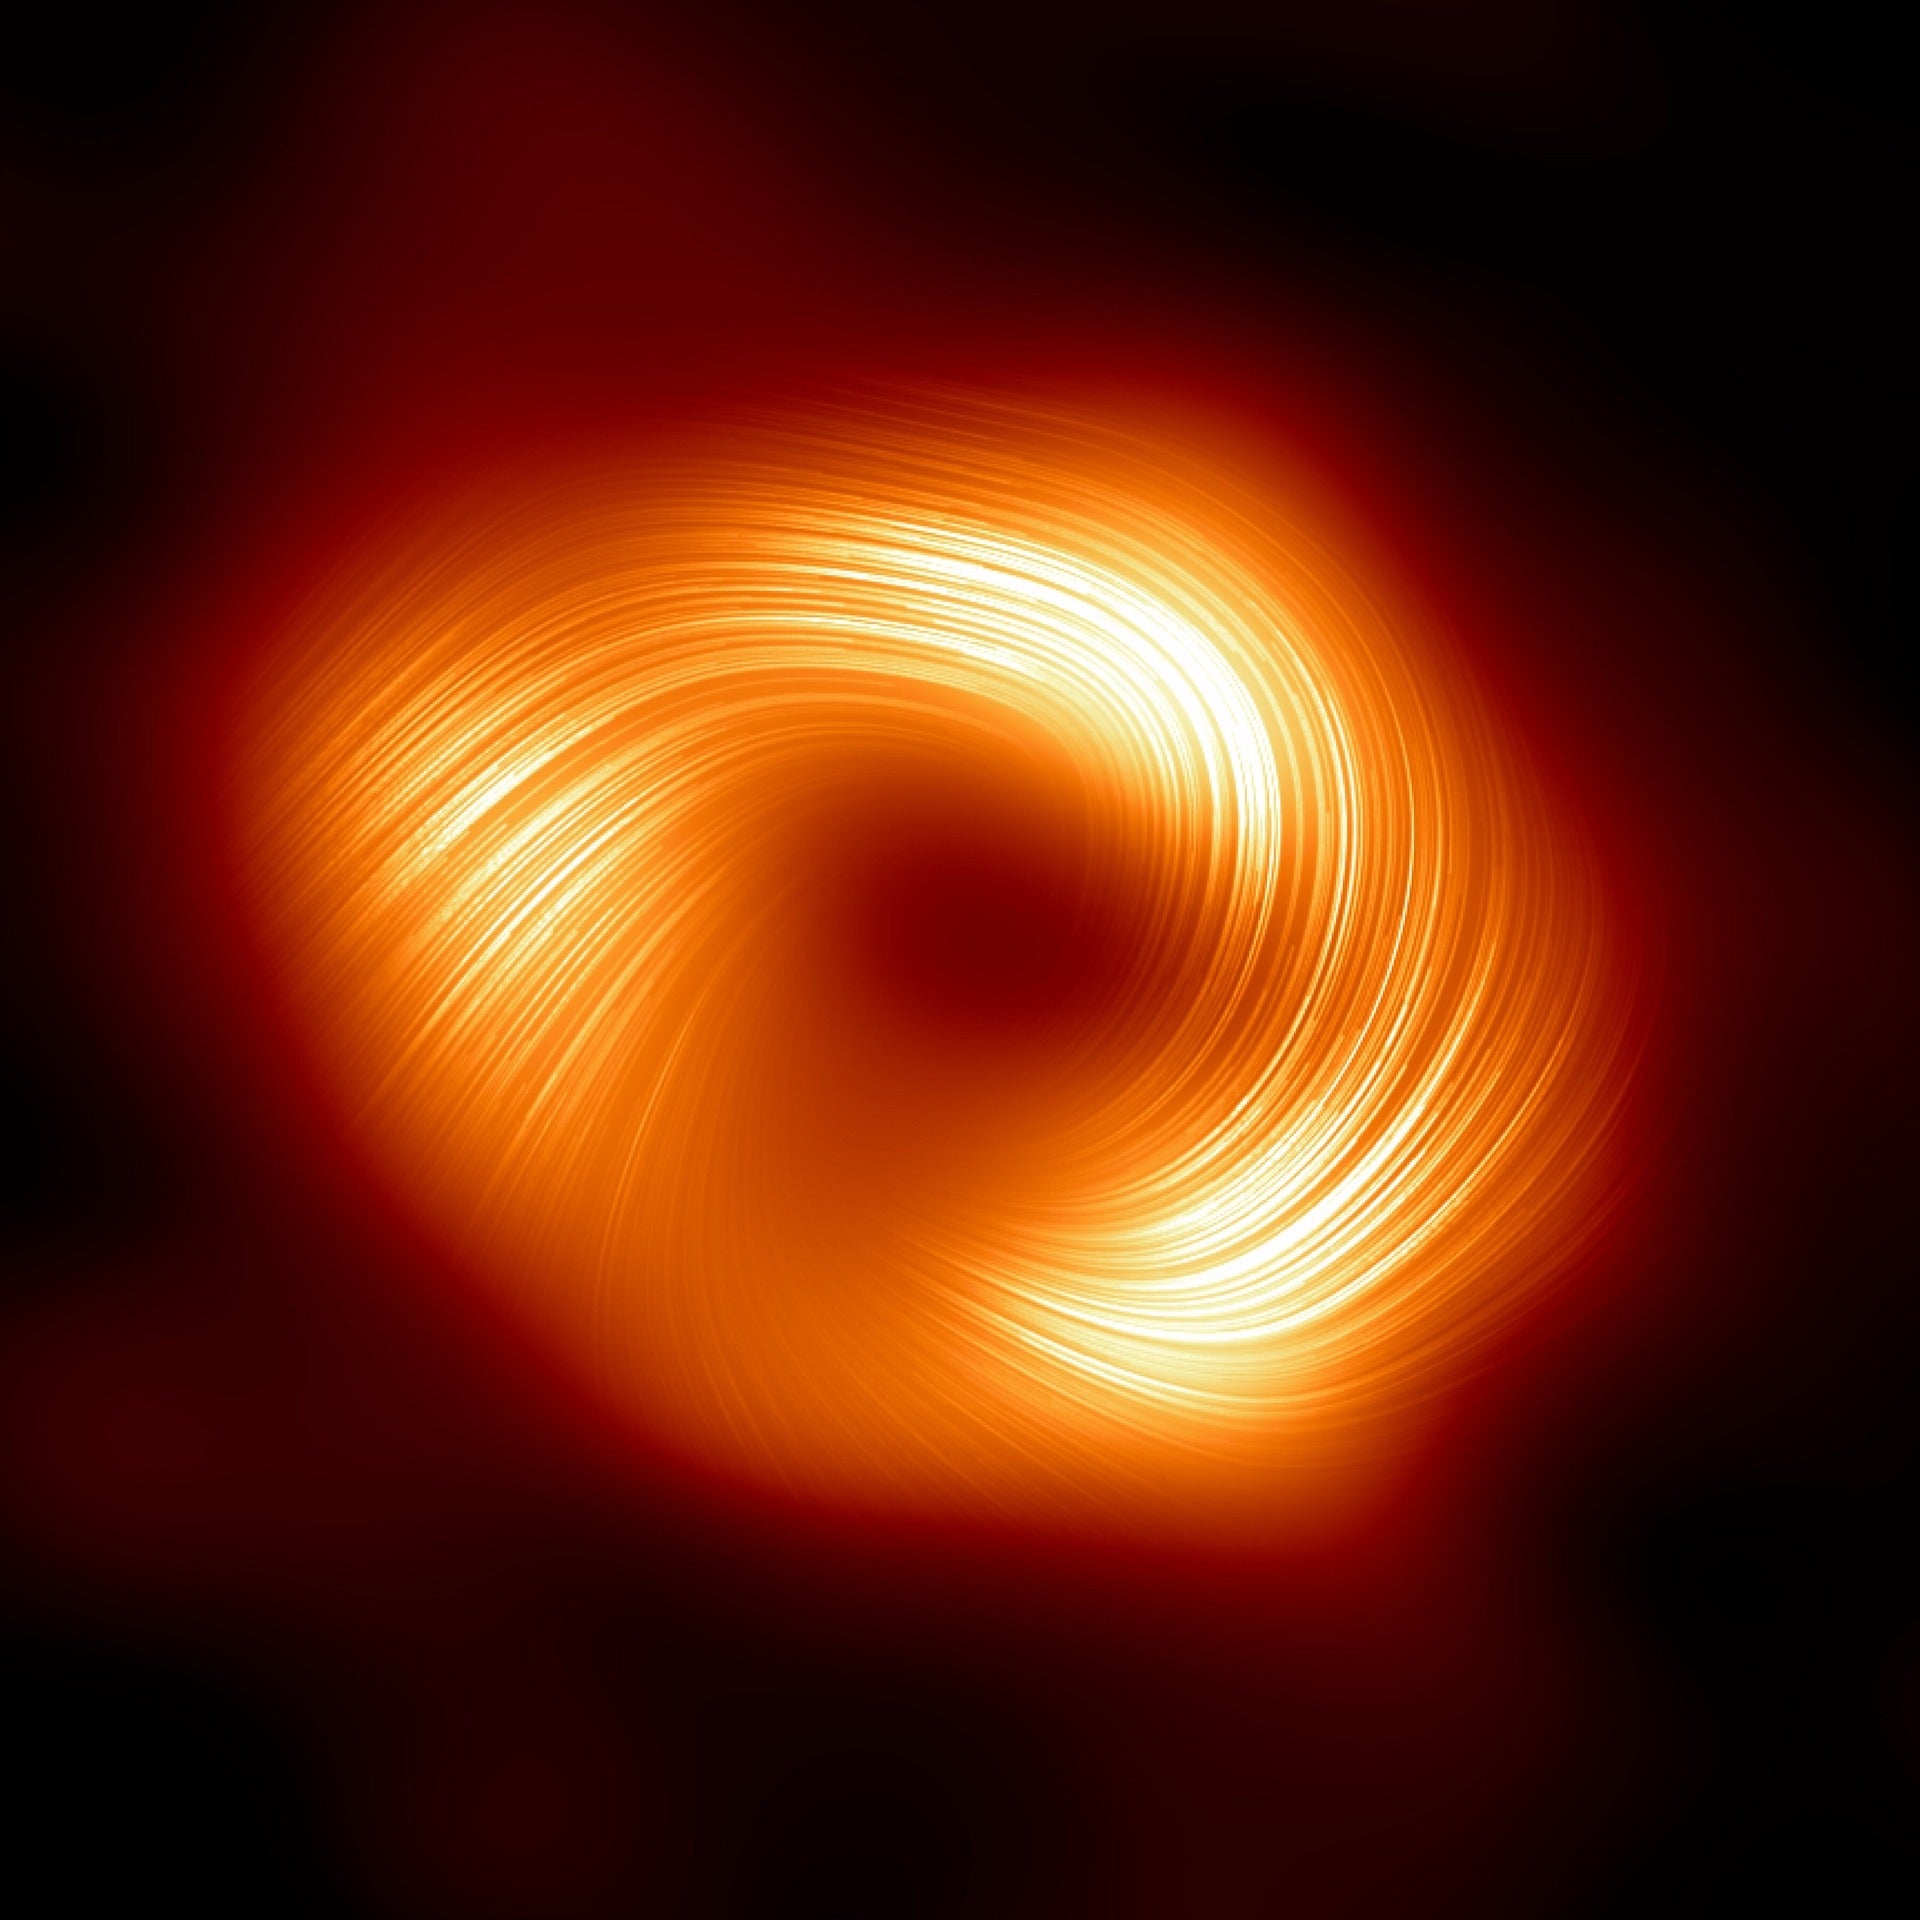 magnetic fields around the Sgr A* black hole at the centre of our galaxy, the Milky Way. 